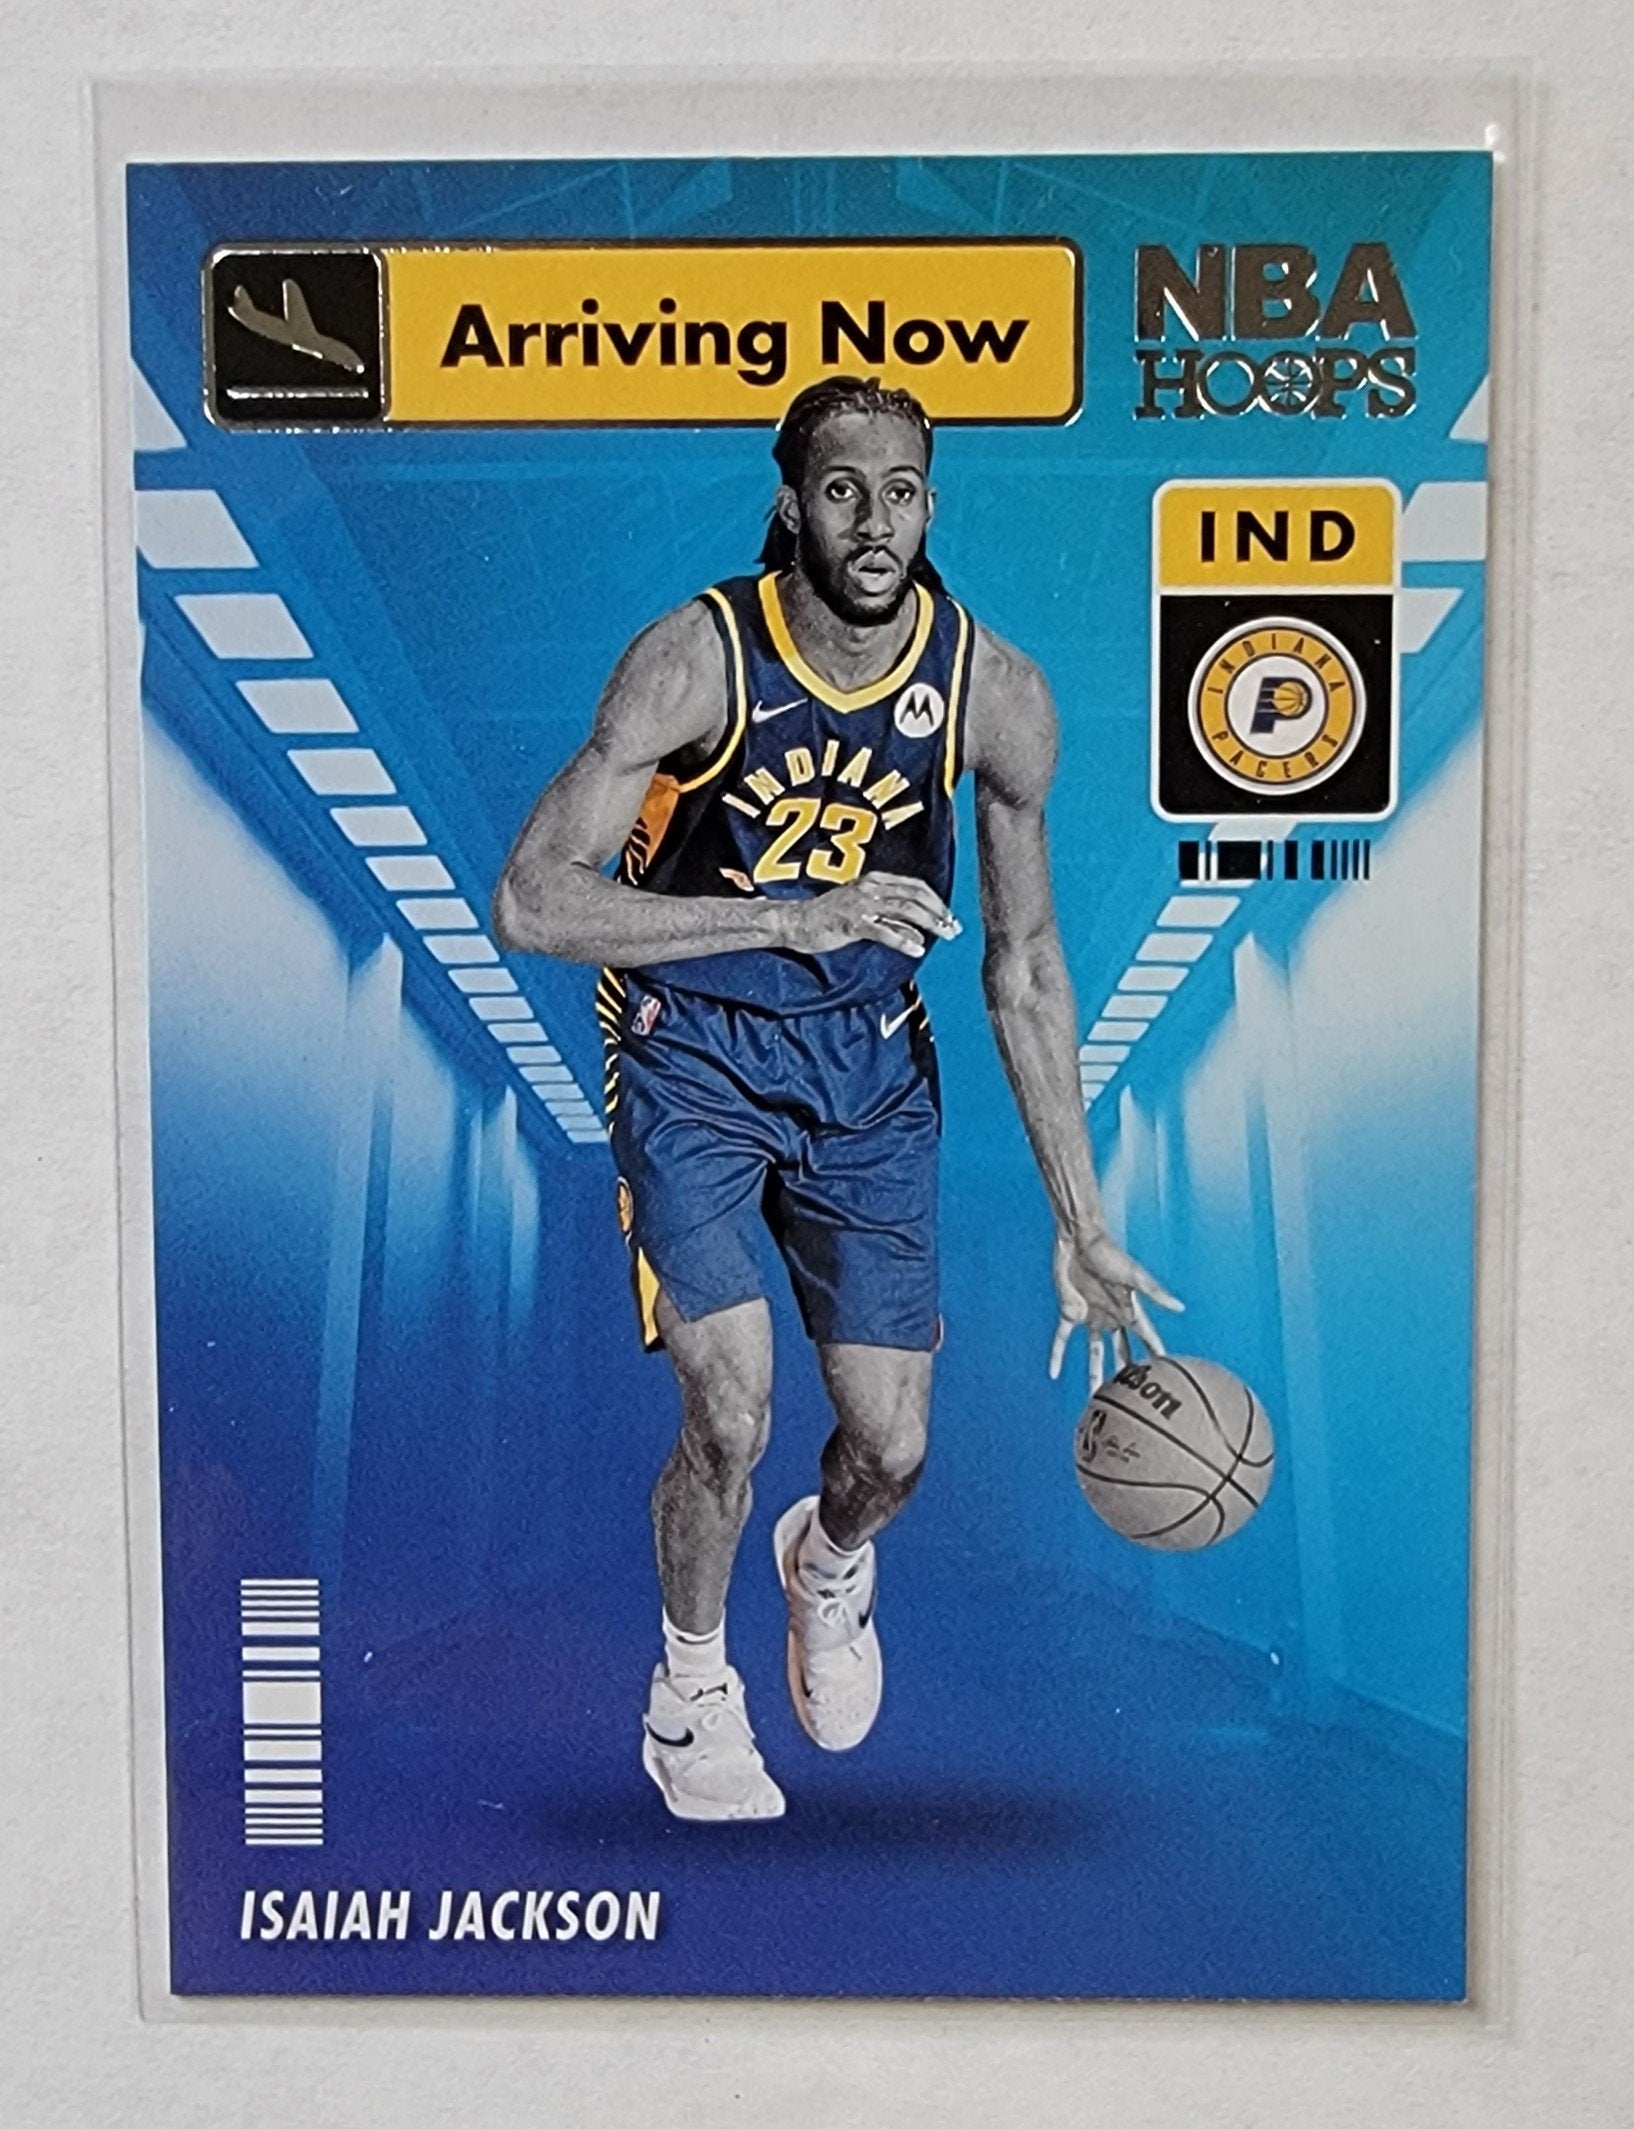 2021-22 Panini NBA Hoops Isaiah Jackson Arriving Now Insert Basketball Card AVM1 simple Xclusive Collectibles   